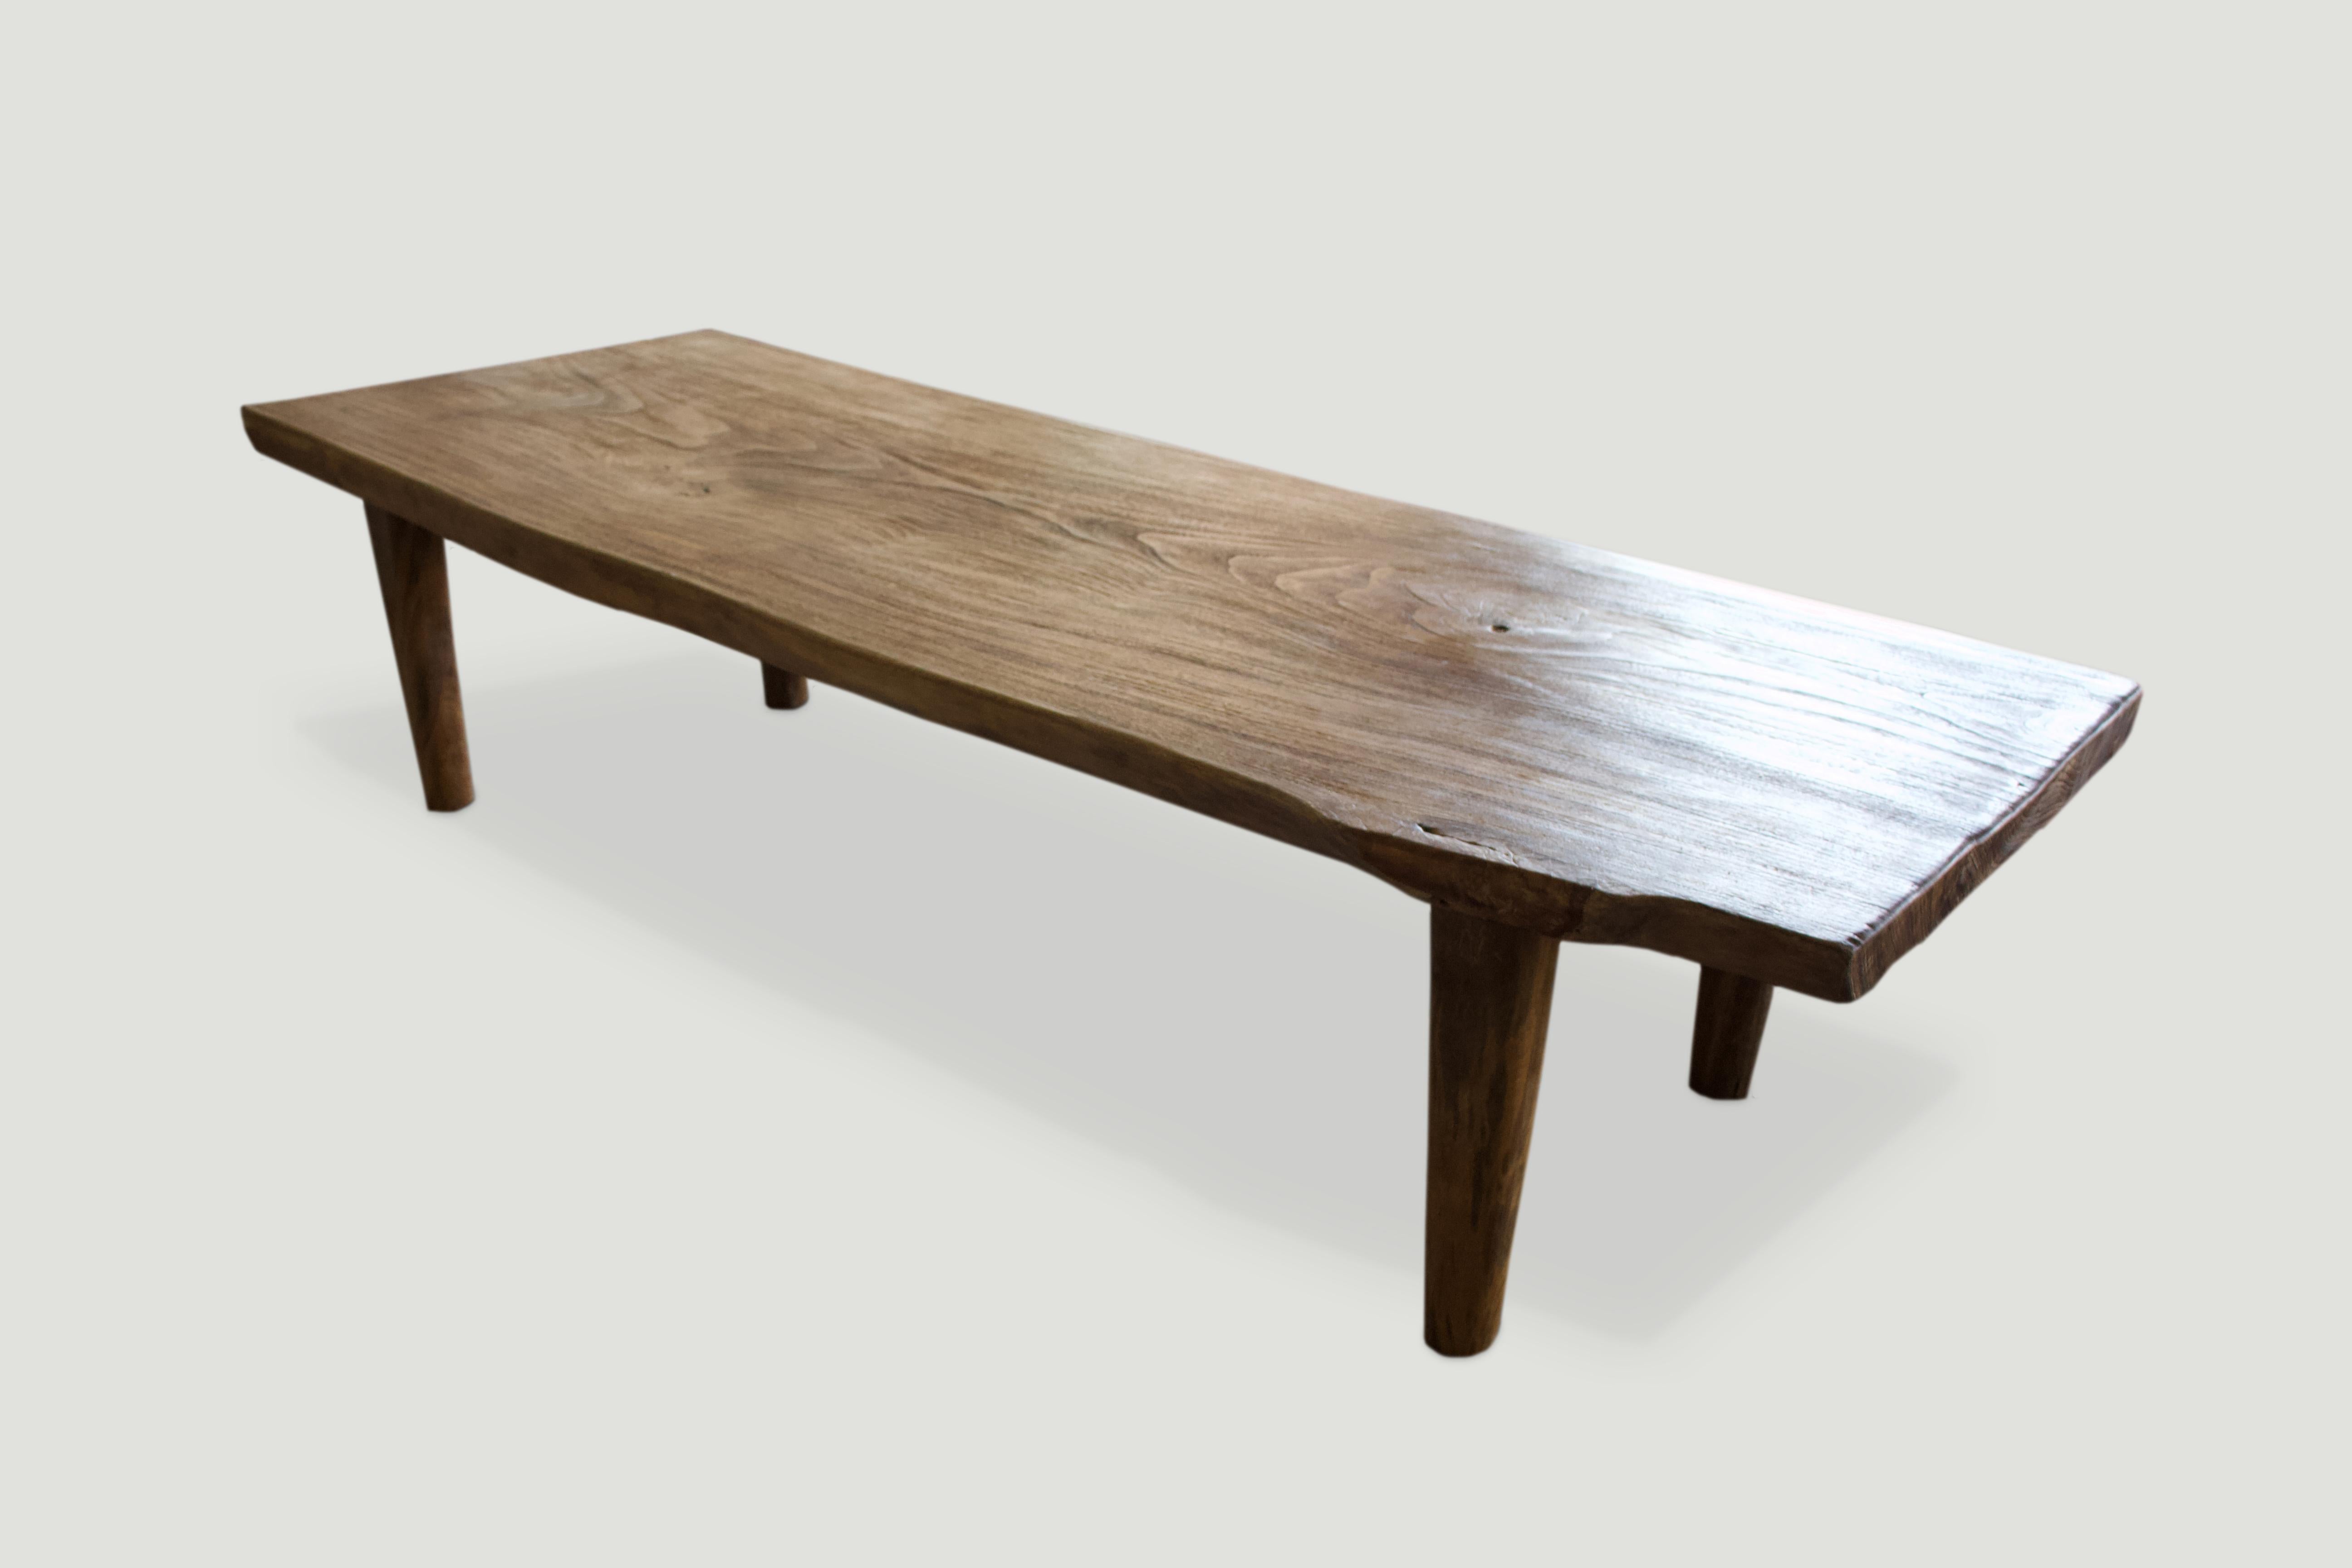 Impressive single slab reclaimed teak coffee table or bench set on mid century style legs. Beautiful grain on this live edge top with a natural oil finish.

Own an Andrianna Shamaris original.

Andrianna Shamaris. The Leader In Modern Organic Design.